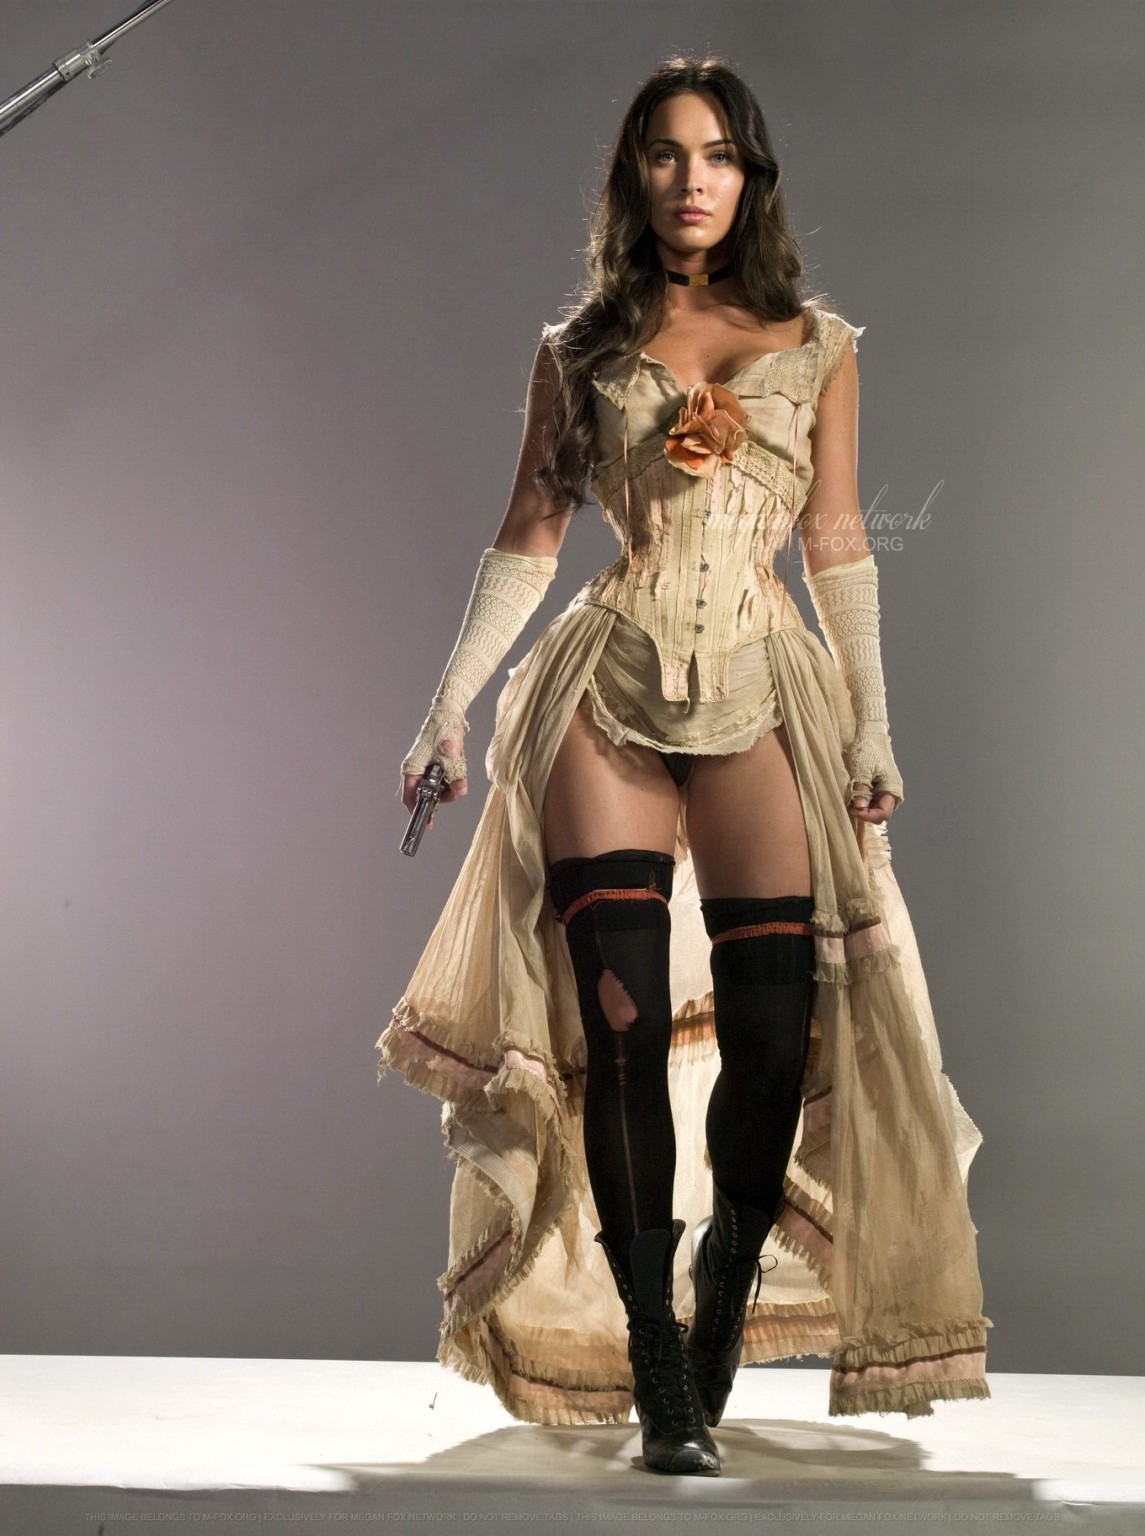 Megan Fox showing off her pussy  cleavage in Jonah Hex promos #75215530